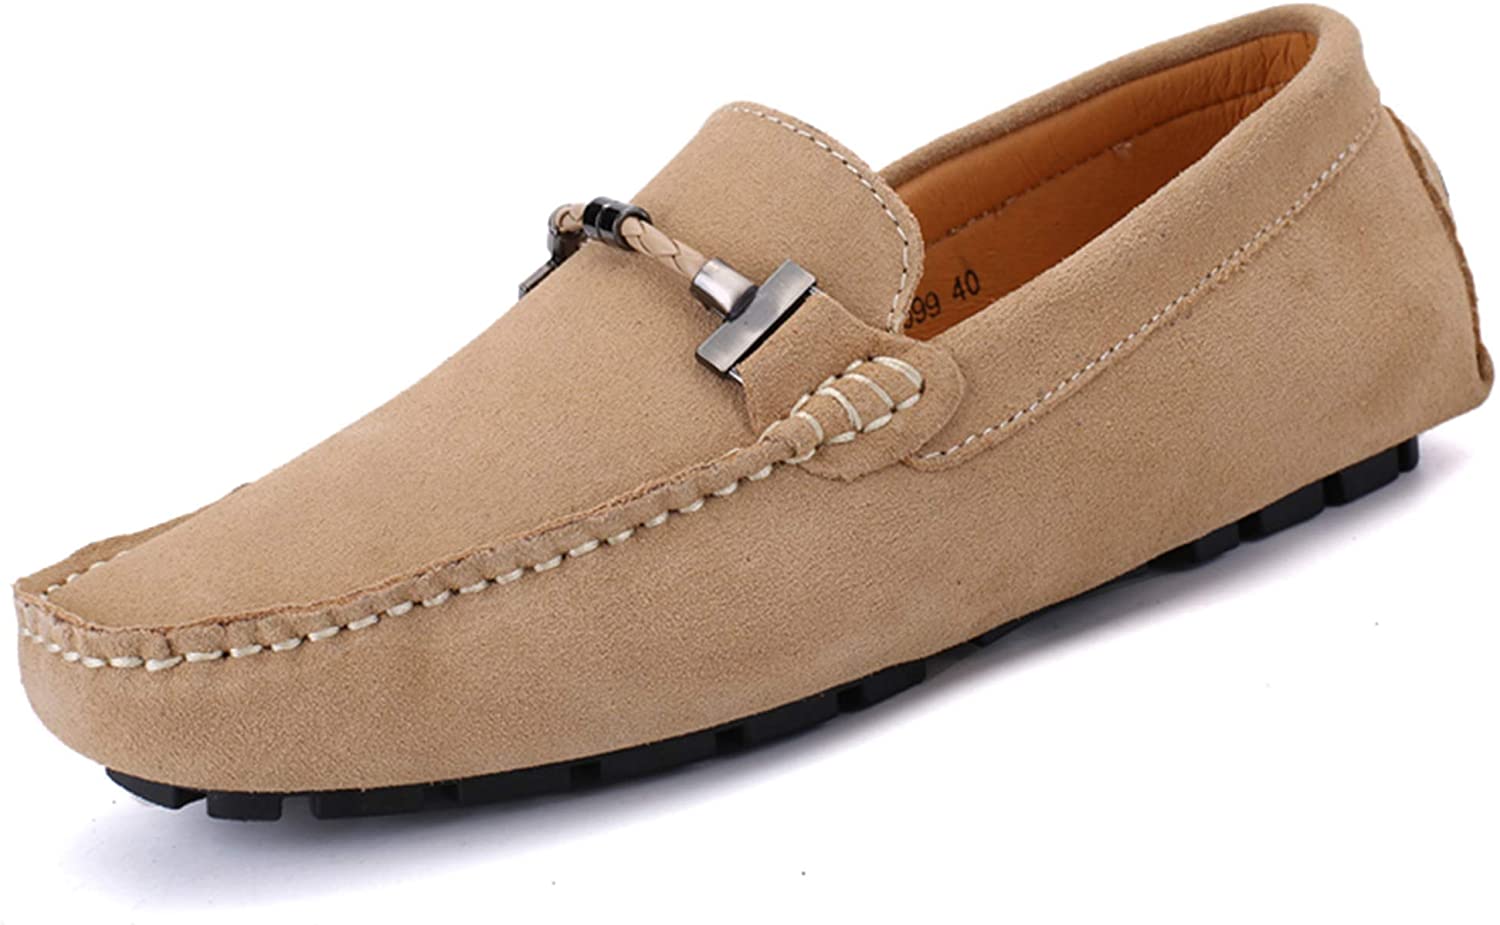 Go Tour Mens Penny Loafers Moccasin Driving Shoes Slip On Flats Boat Shoes 